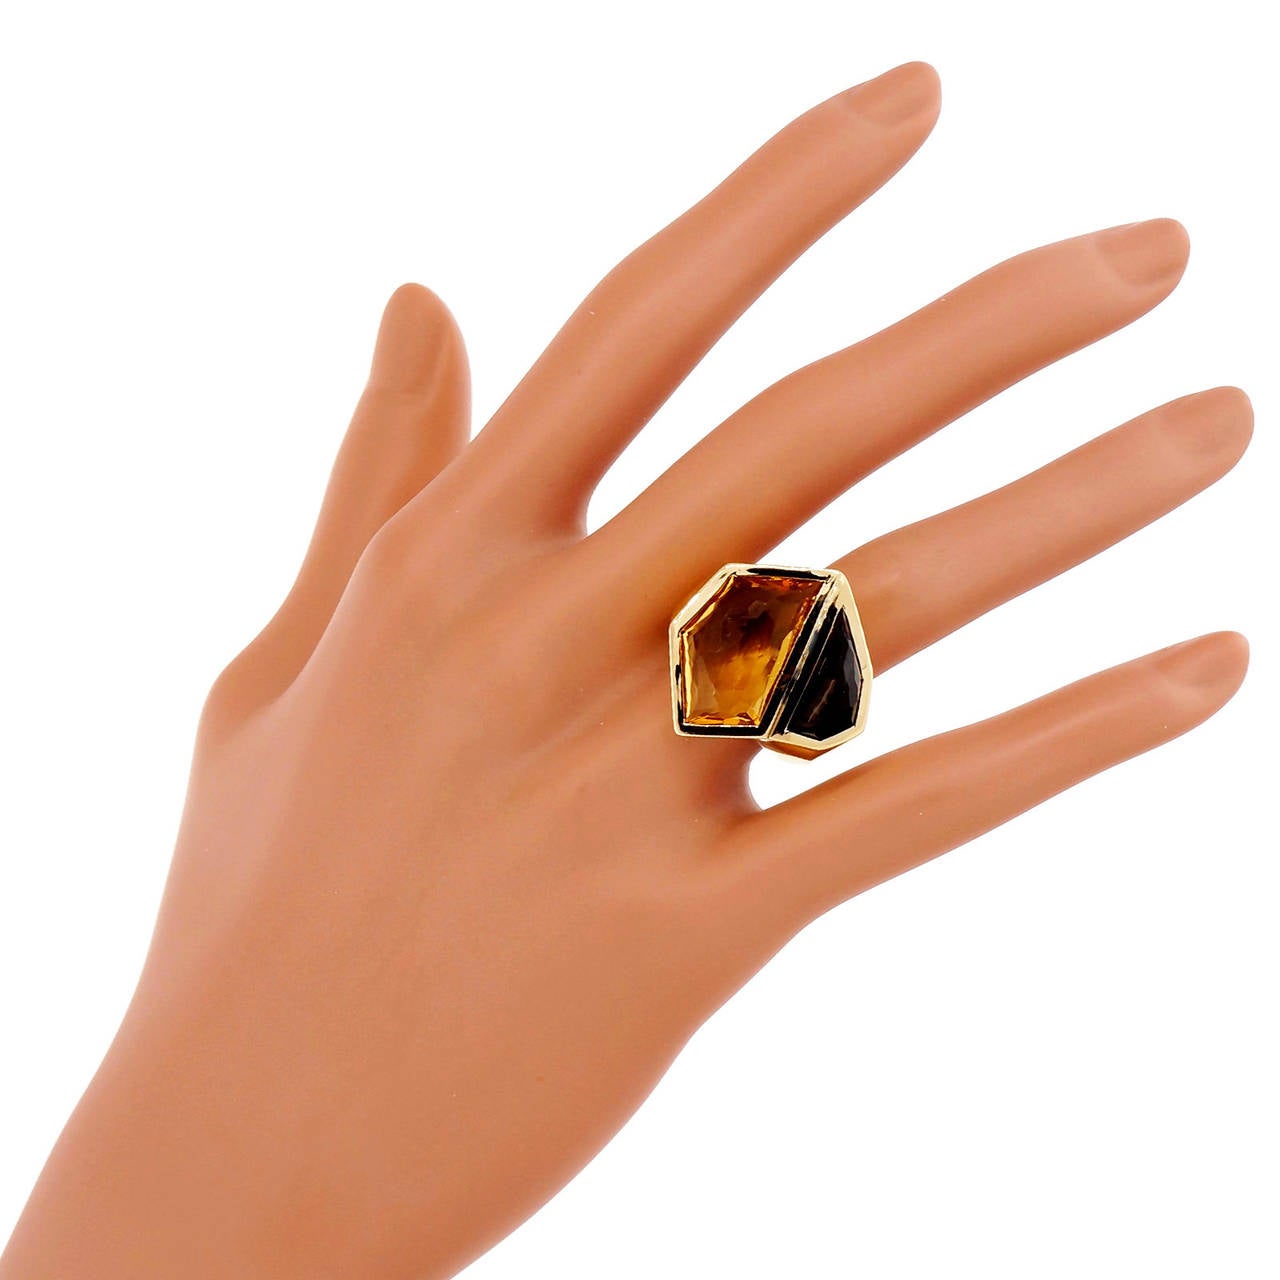 Allia 10.80 Carat Citrine Smoky Quartz Gold Cocktail Ring In Excellent Condition For Sale In Stamford, CT